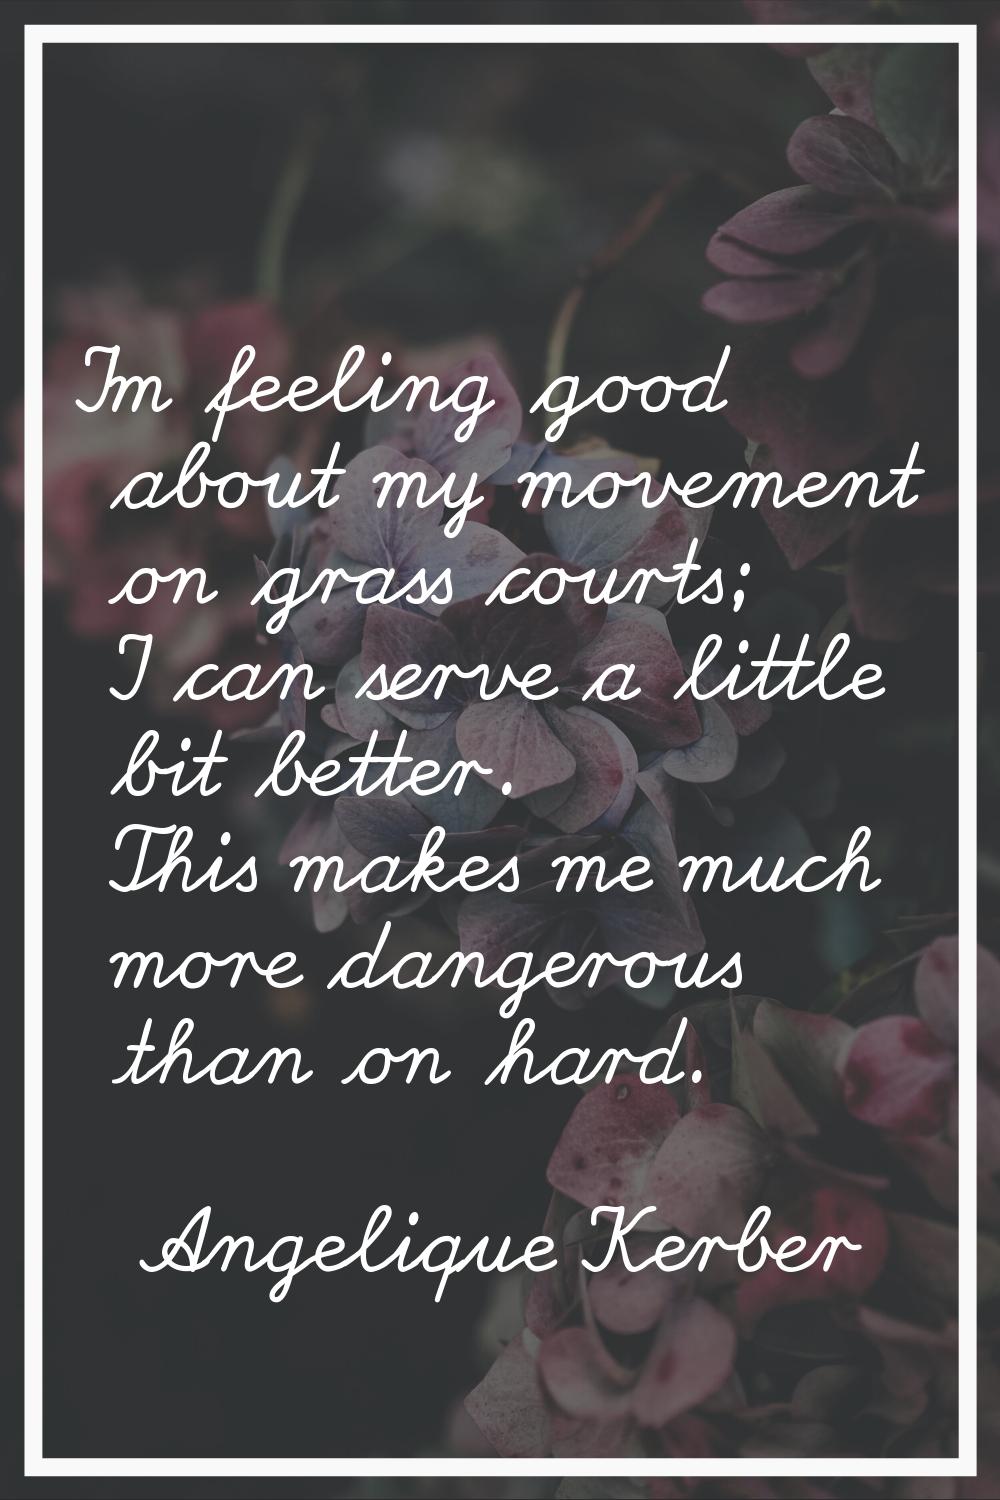 I'm feeling good about my movement on grass courts; I can serve a little bit better. This makes me 